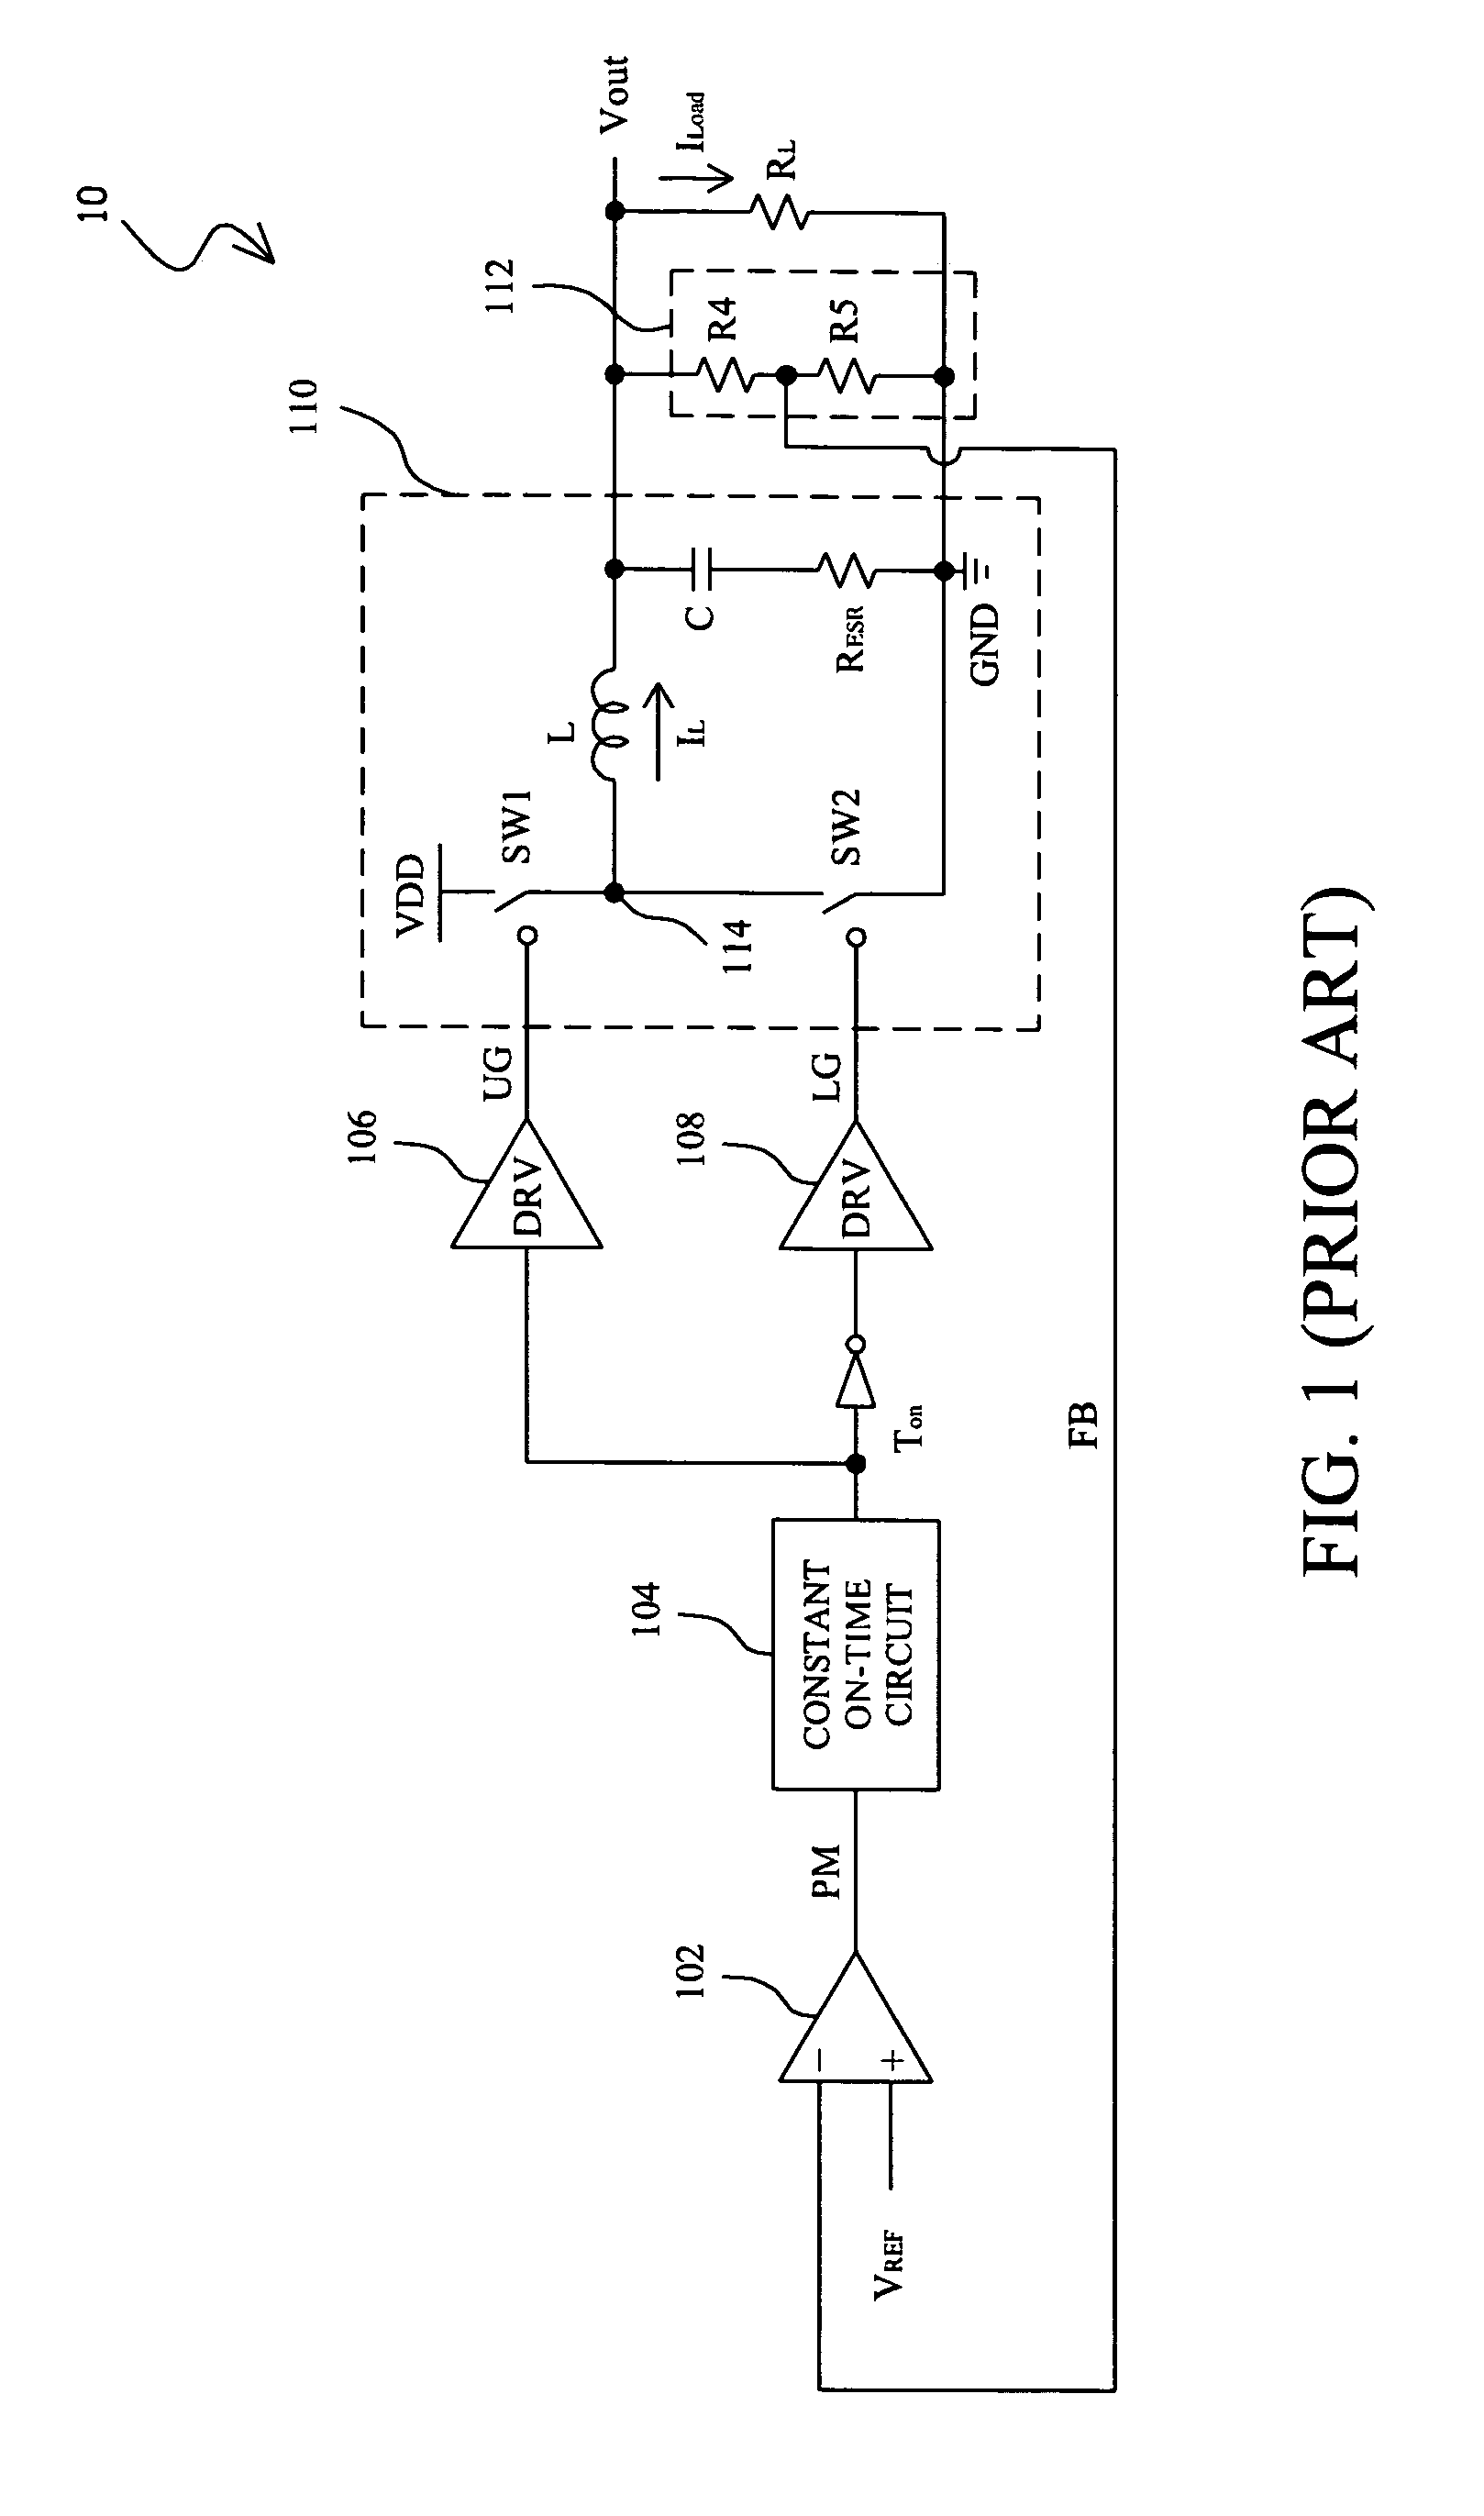 Apparatus and method for noise sensitivity improvement to a switching system